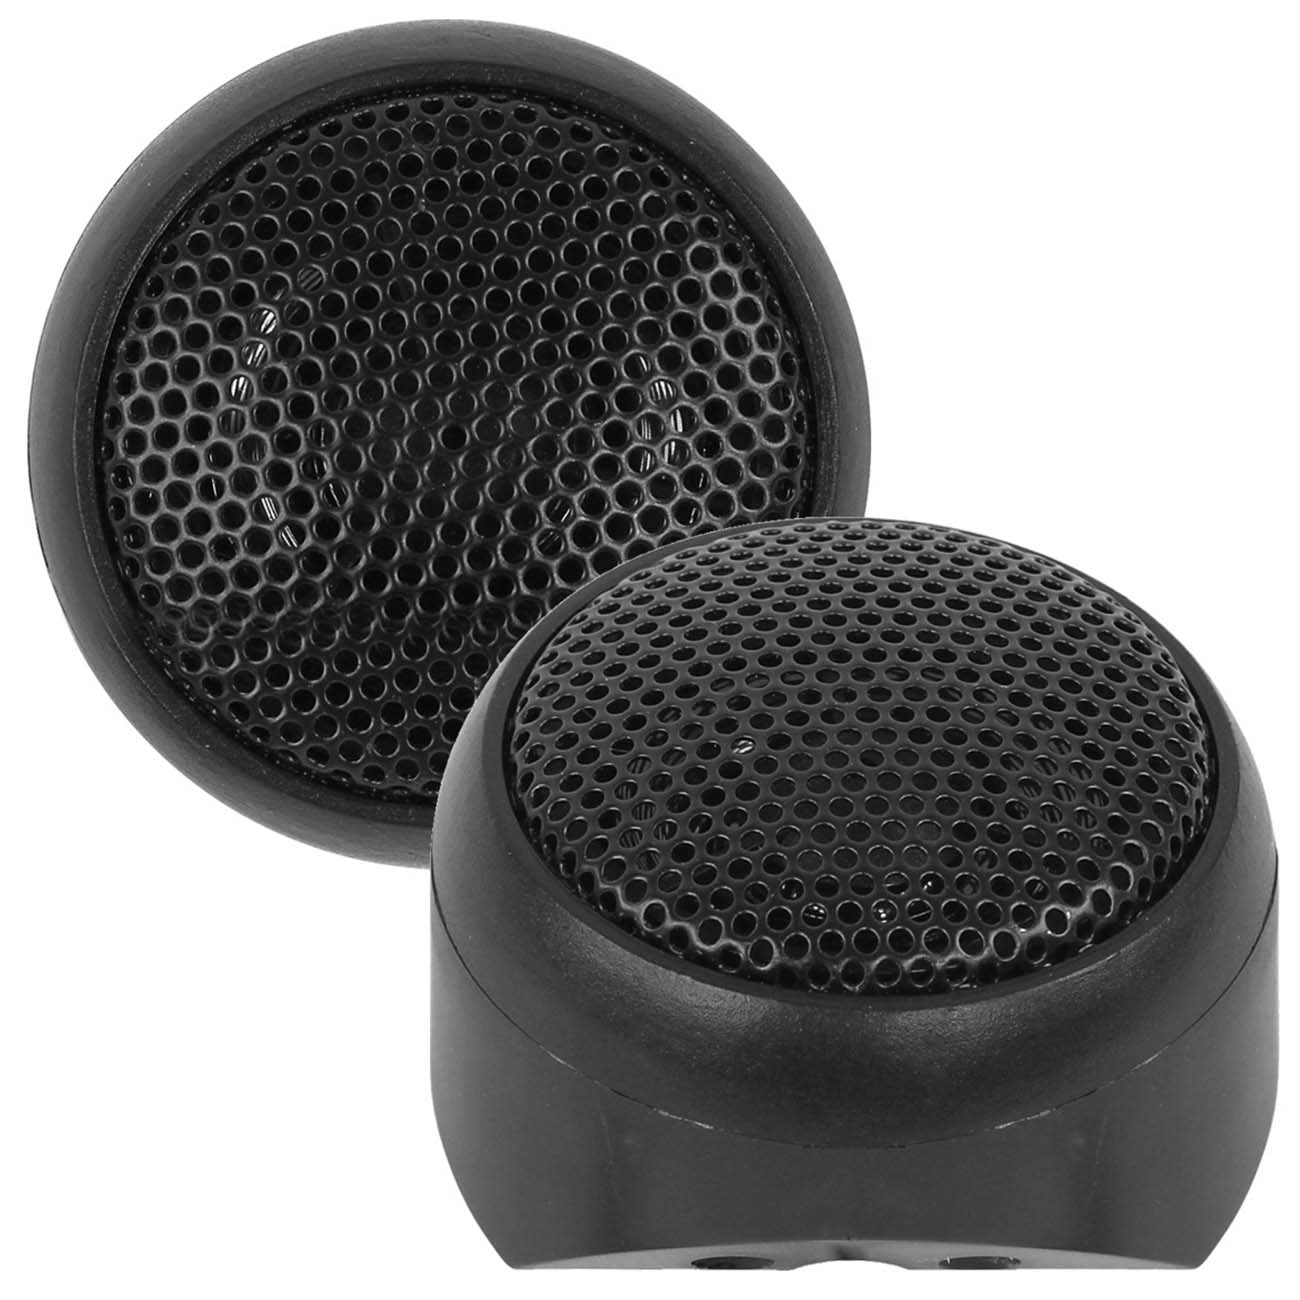 Audiopipe 250w Super High Frequency 1" Dome Tweeter Sold In Pairs